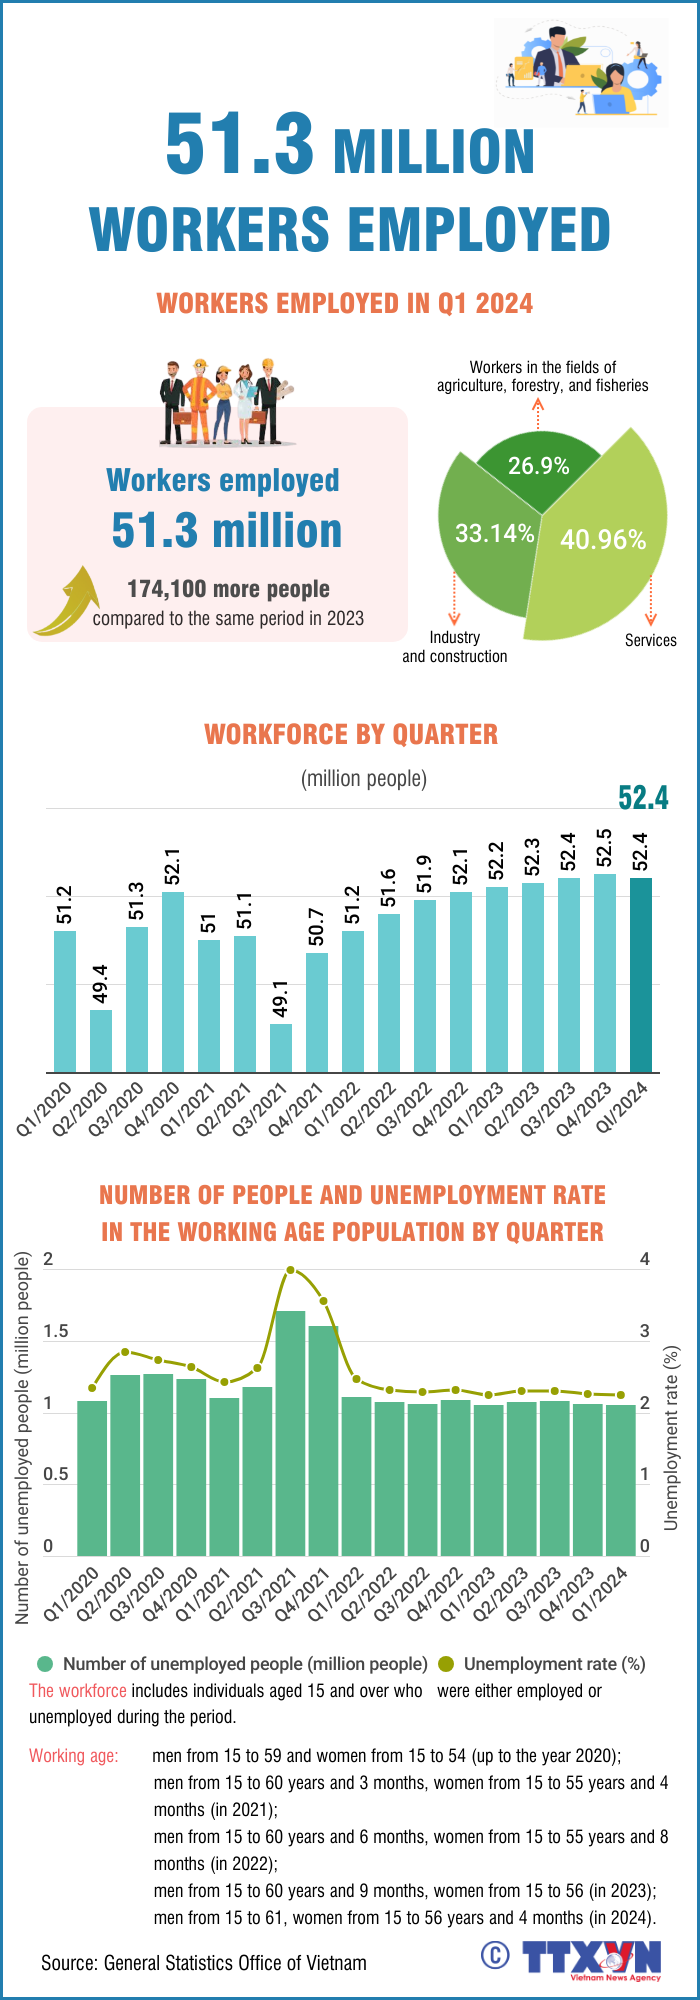 Q1 2024: 51.3 million workers employed